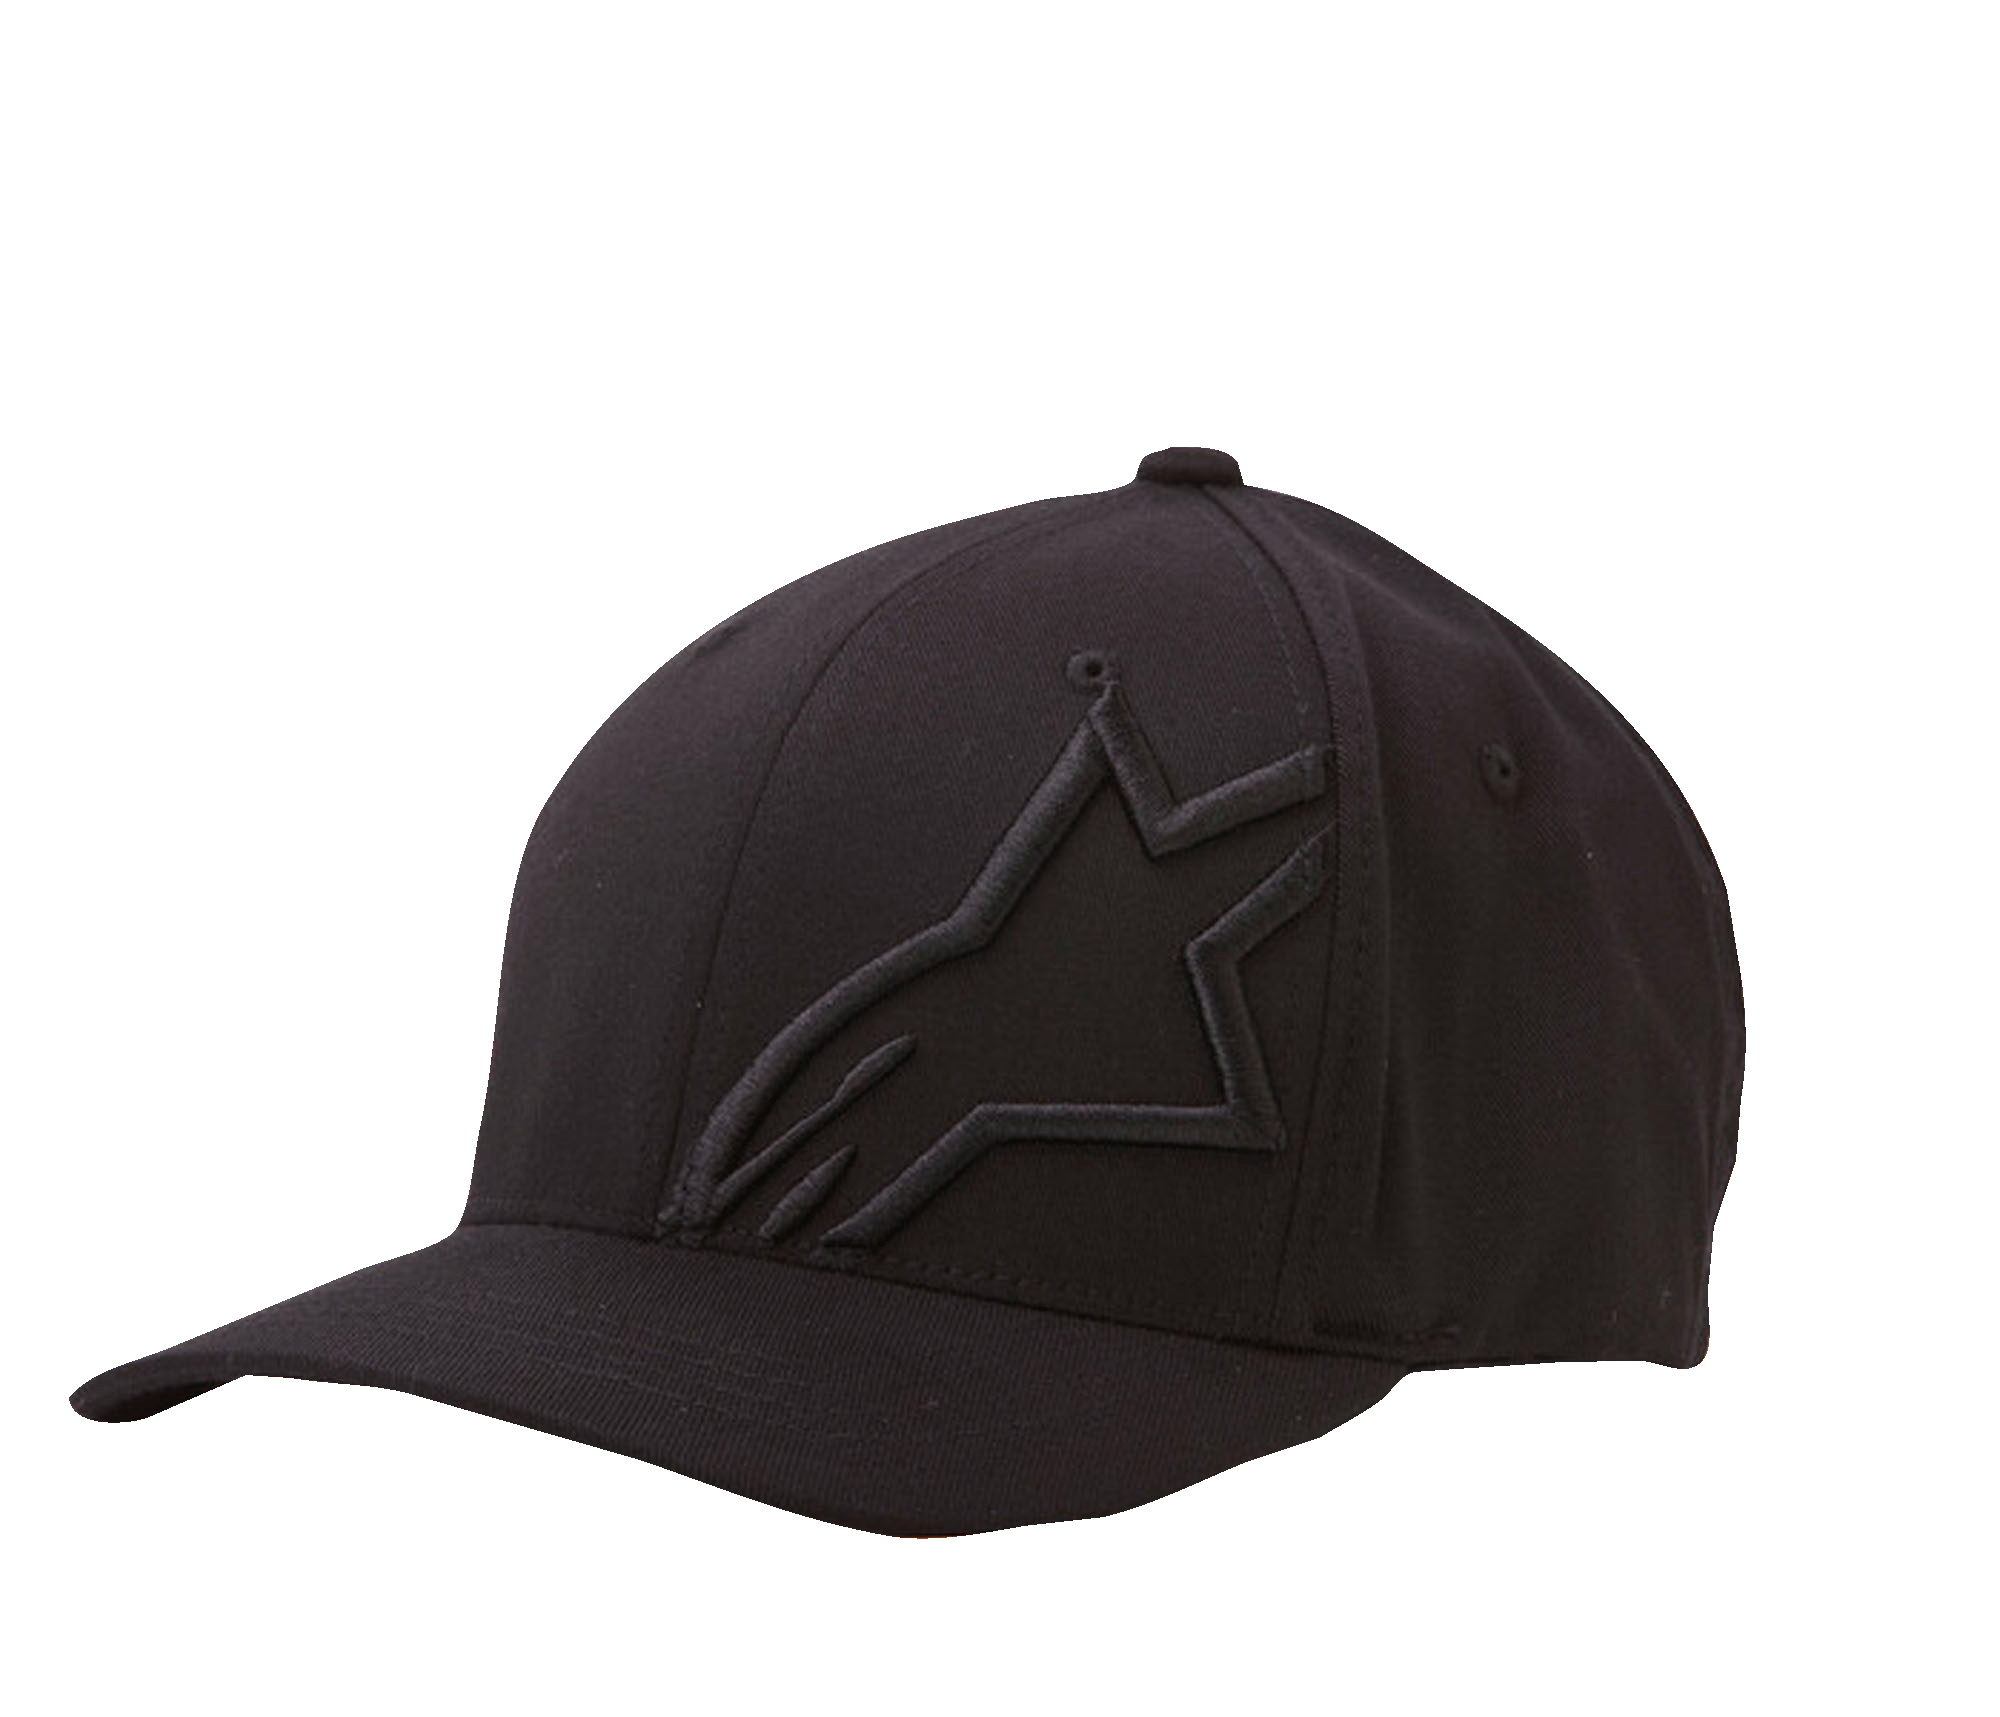 Corp Shift 2 Curved Bill Hat | Alpinestars® Official Site